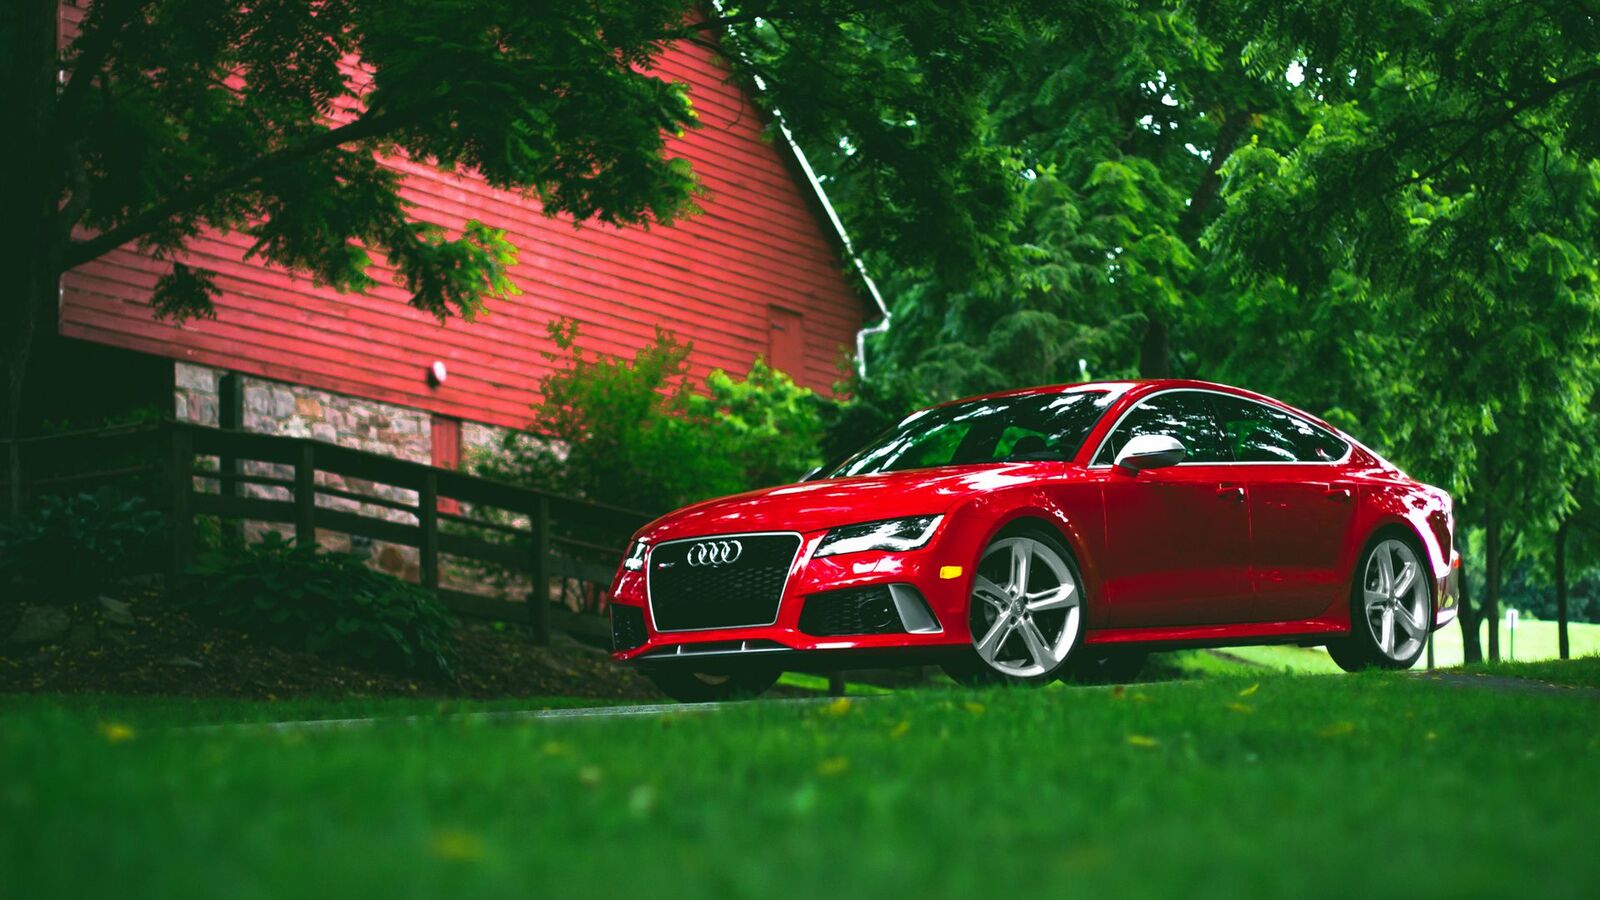 audi_rs7_red_grass_side_view_99465_1920x1080.jpg